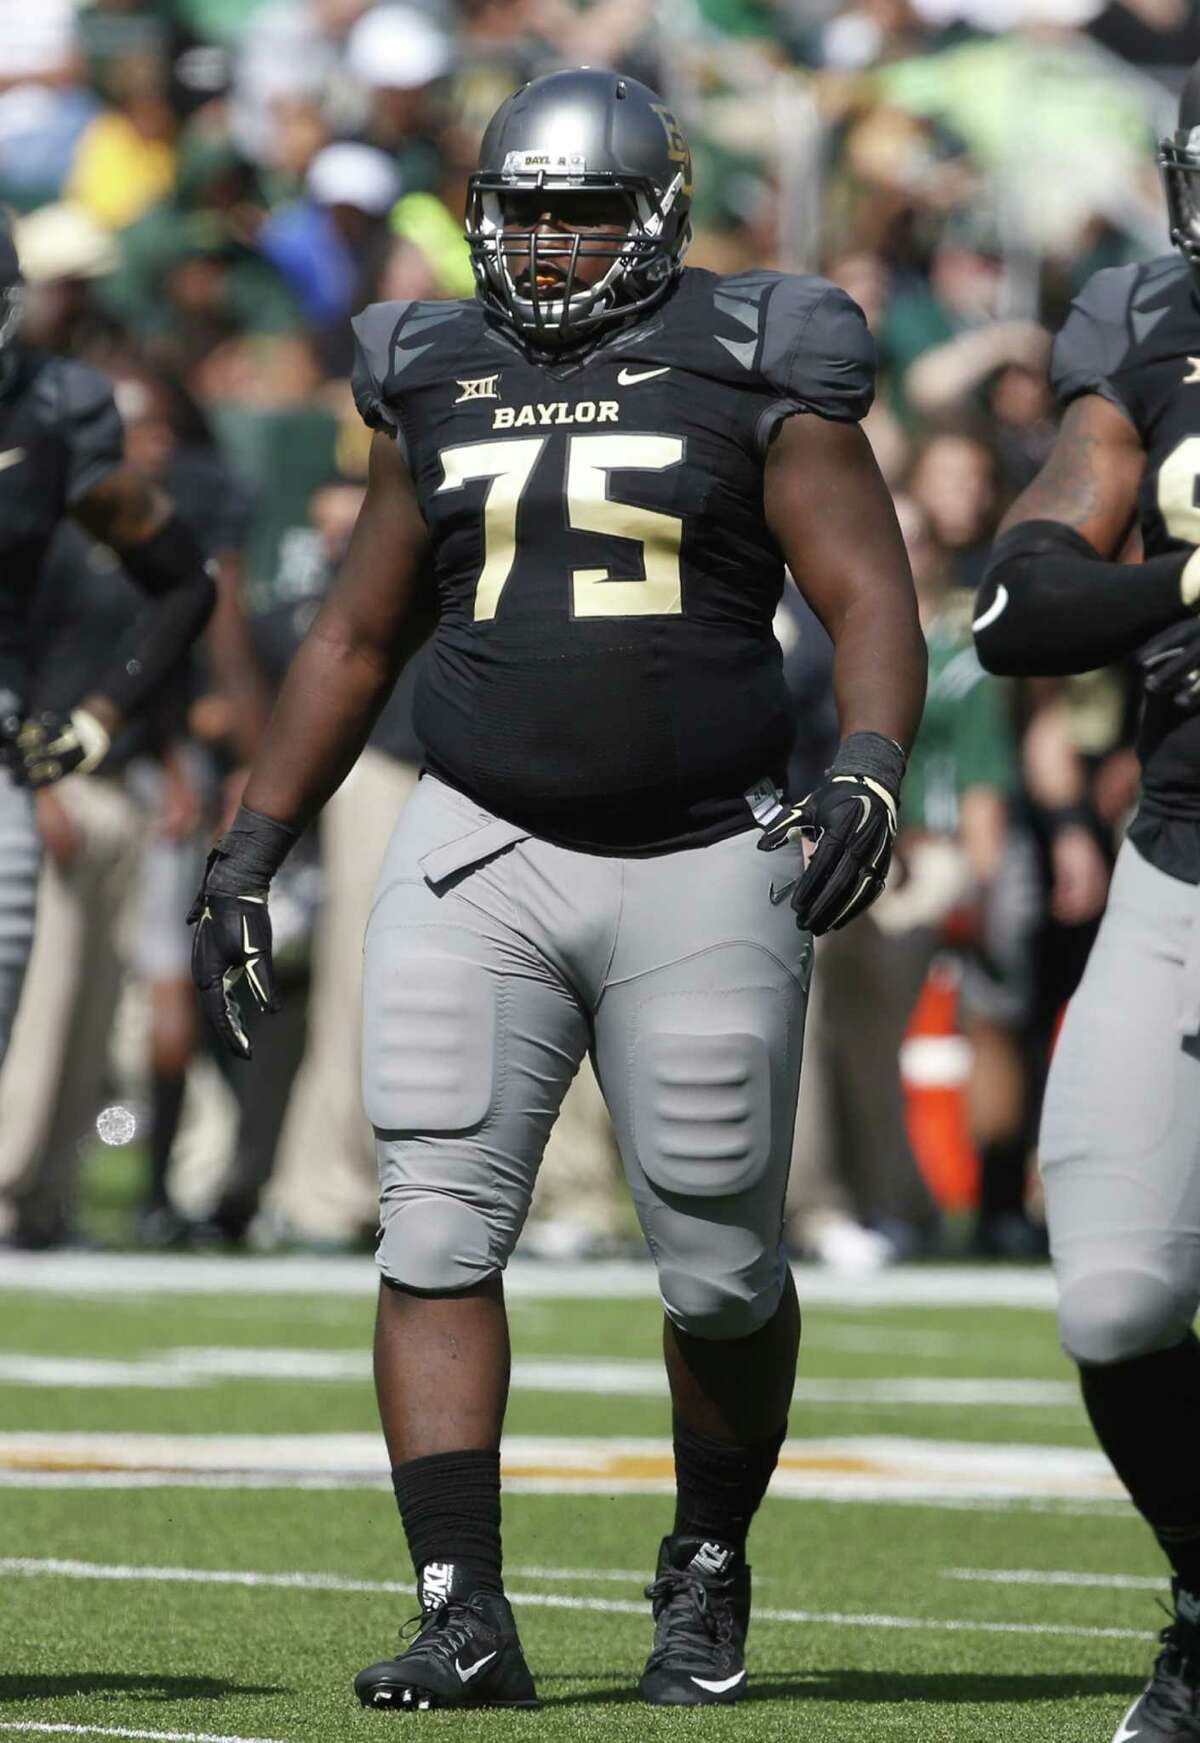 Baylor defensive tackle Andrew Billings (75) waits for a play to begin against West Virginia in the second half of an NCAA college football game, Saturday, Oct 17, 2015, in Waco.